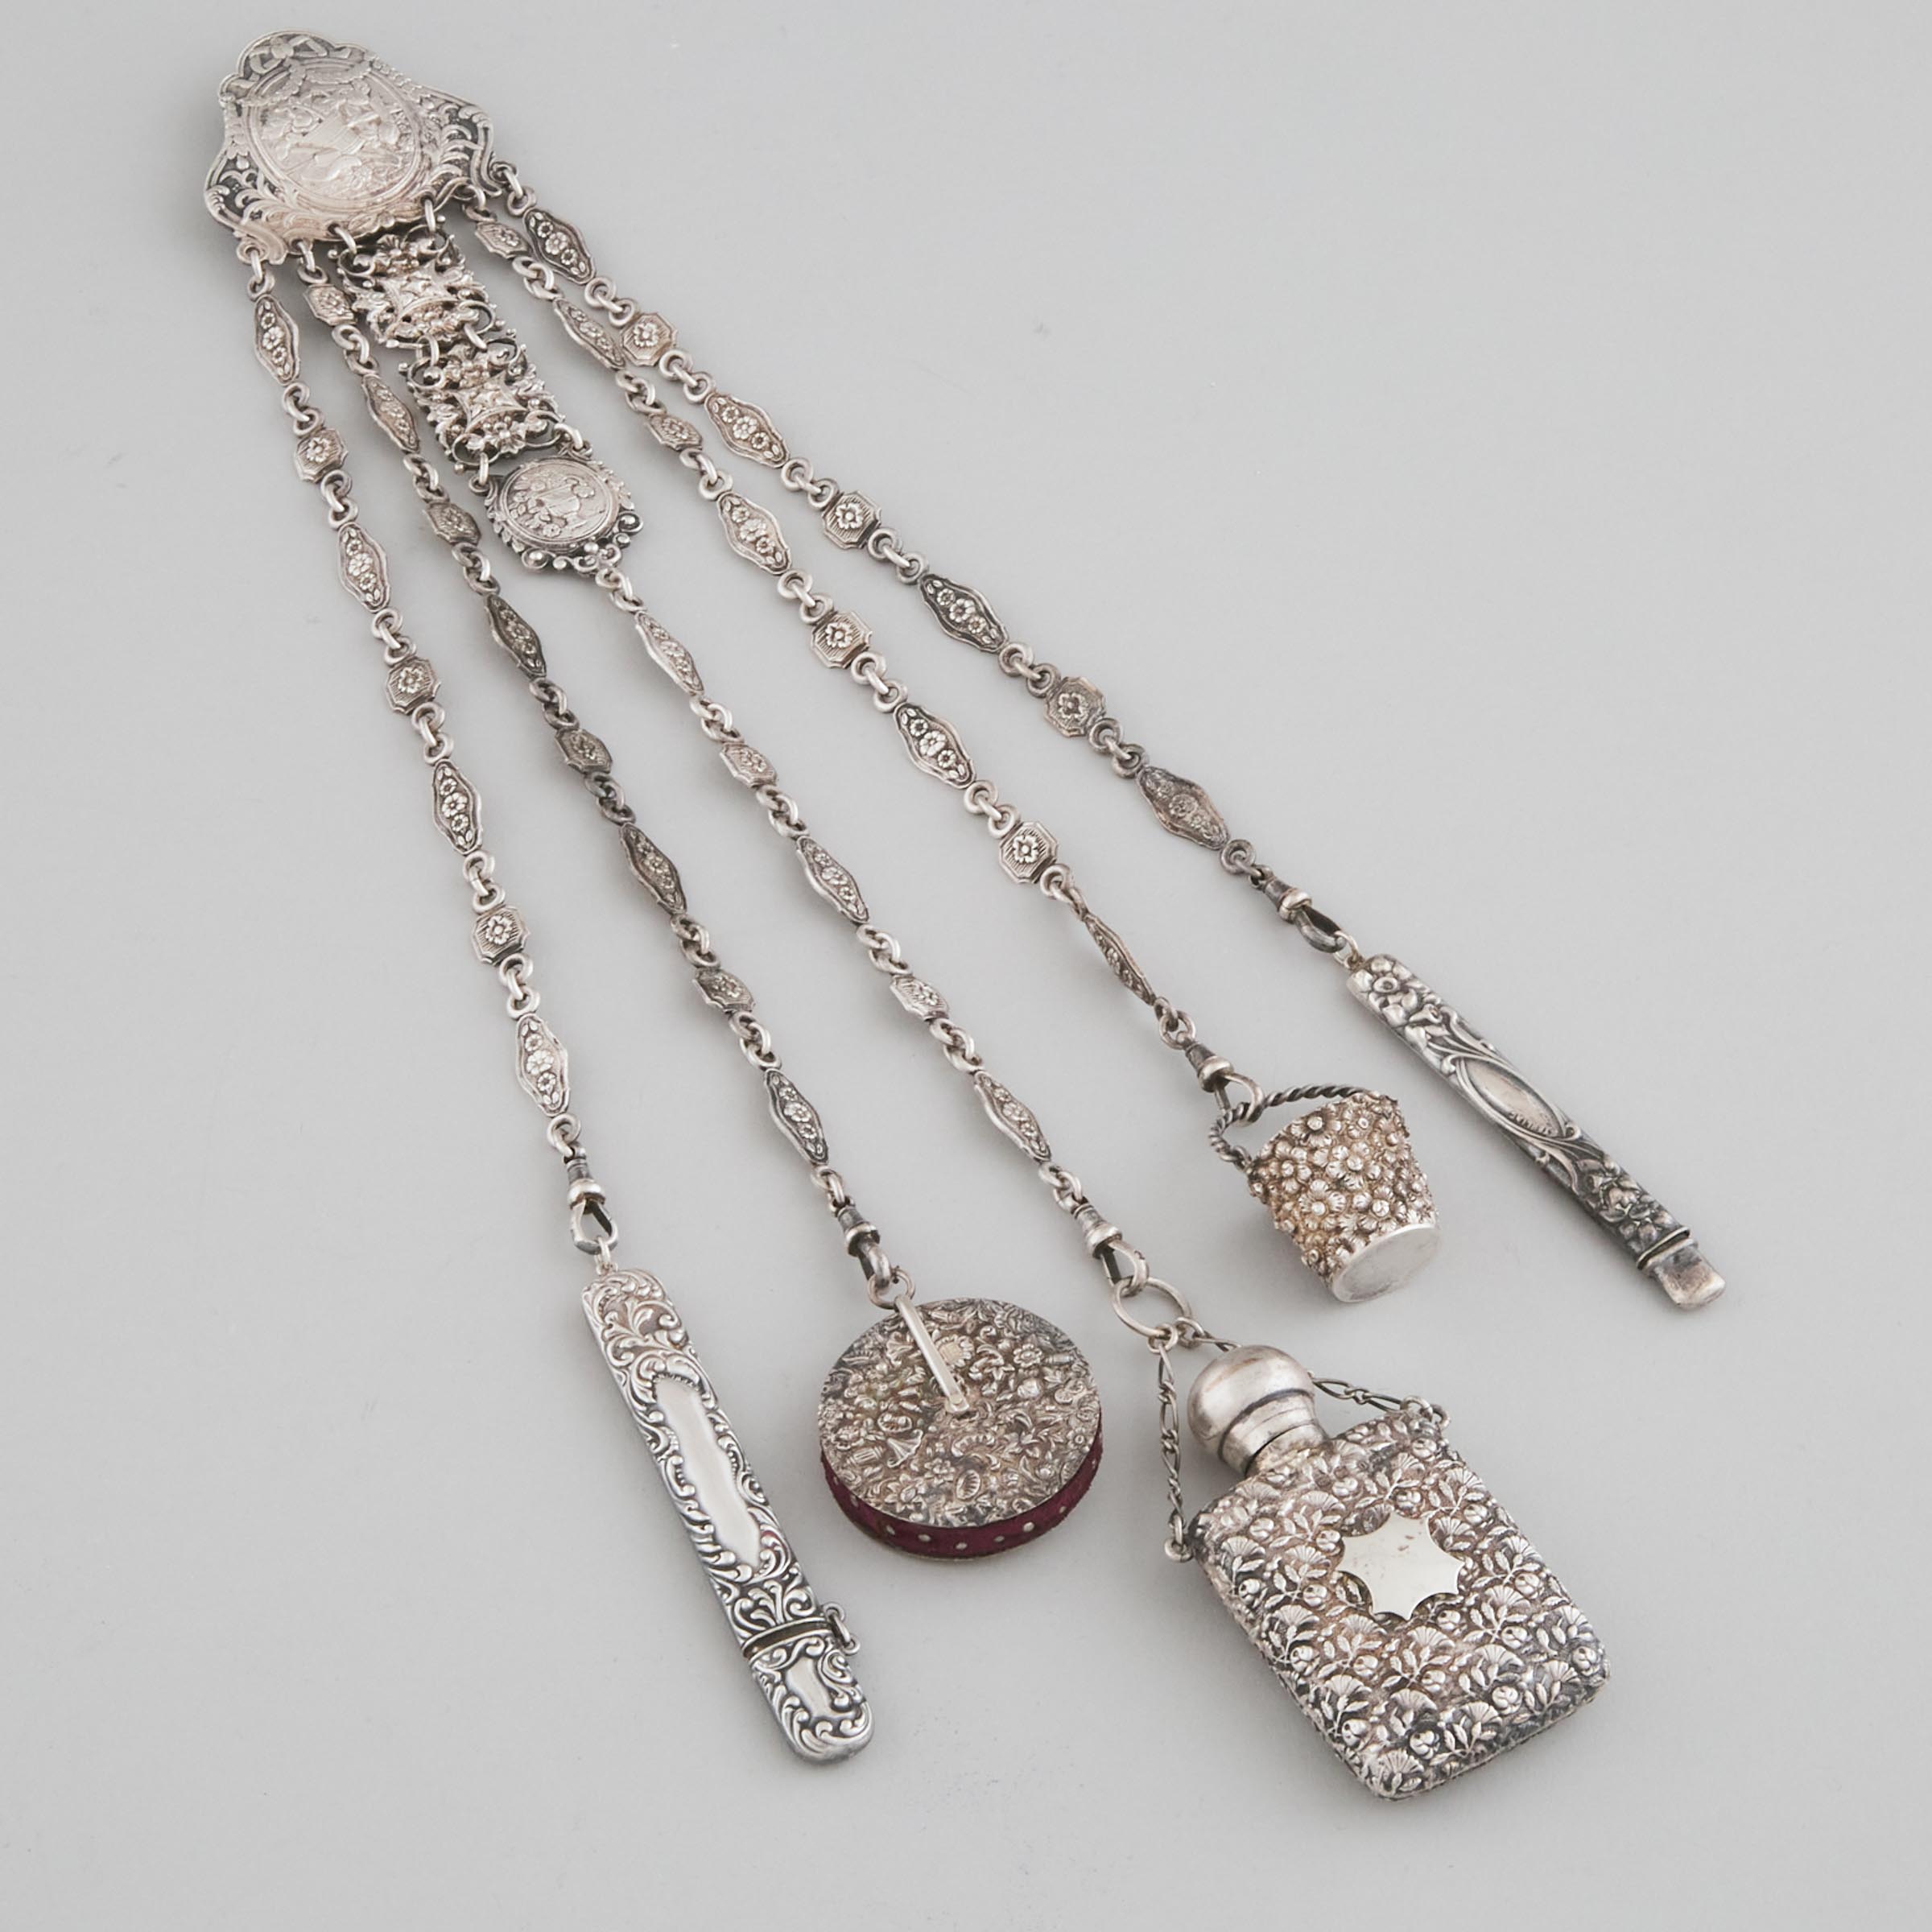 Victorian Silver Chatelaine, Lawrence